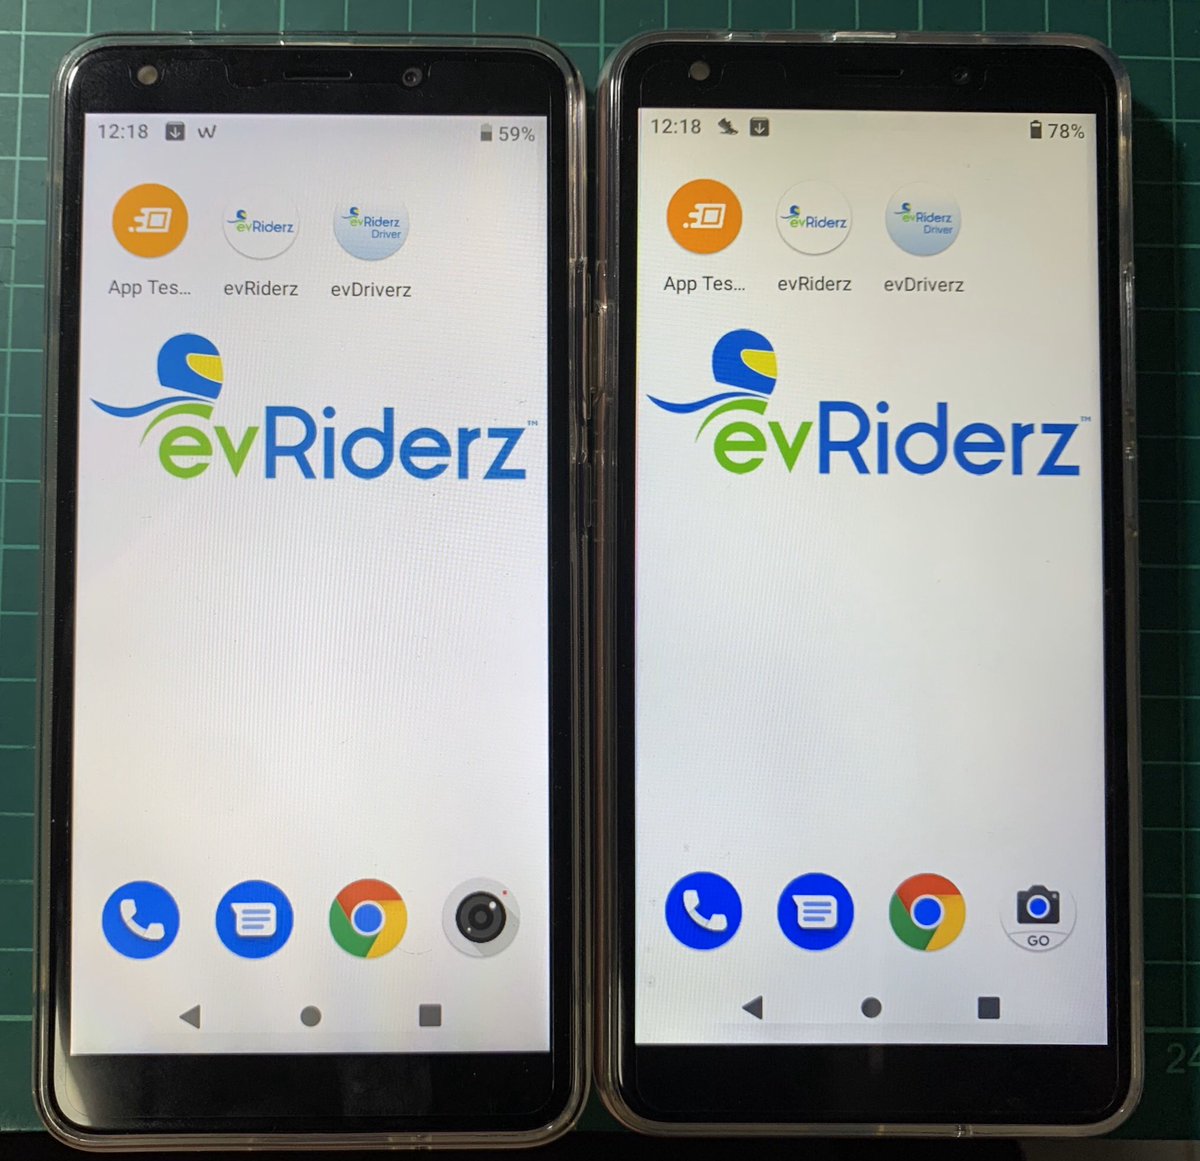 Team testing our Driverz Thai smartphone, preloaded with our App.  Each evBike comes with an evRiderz smartphone to accelerate the digital economy in our launch country, Thailand. #evriderz #evvehicles #iot #jfdi